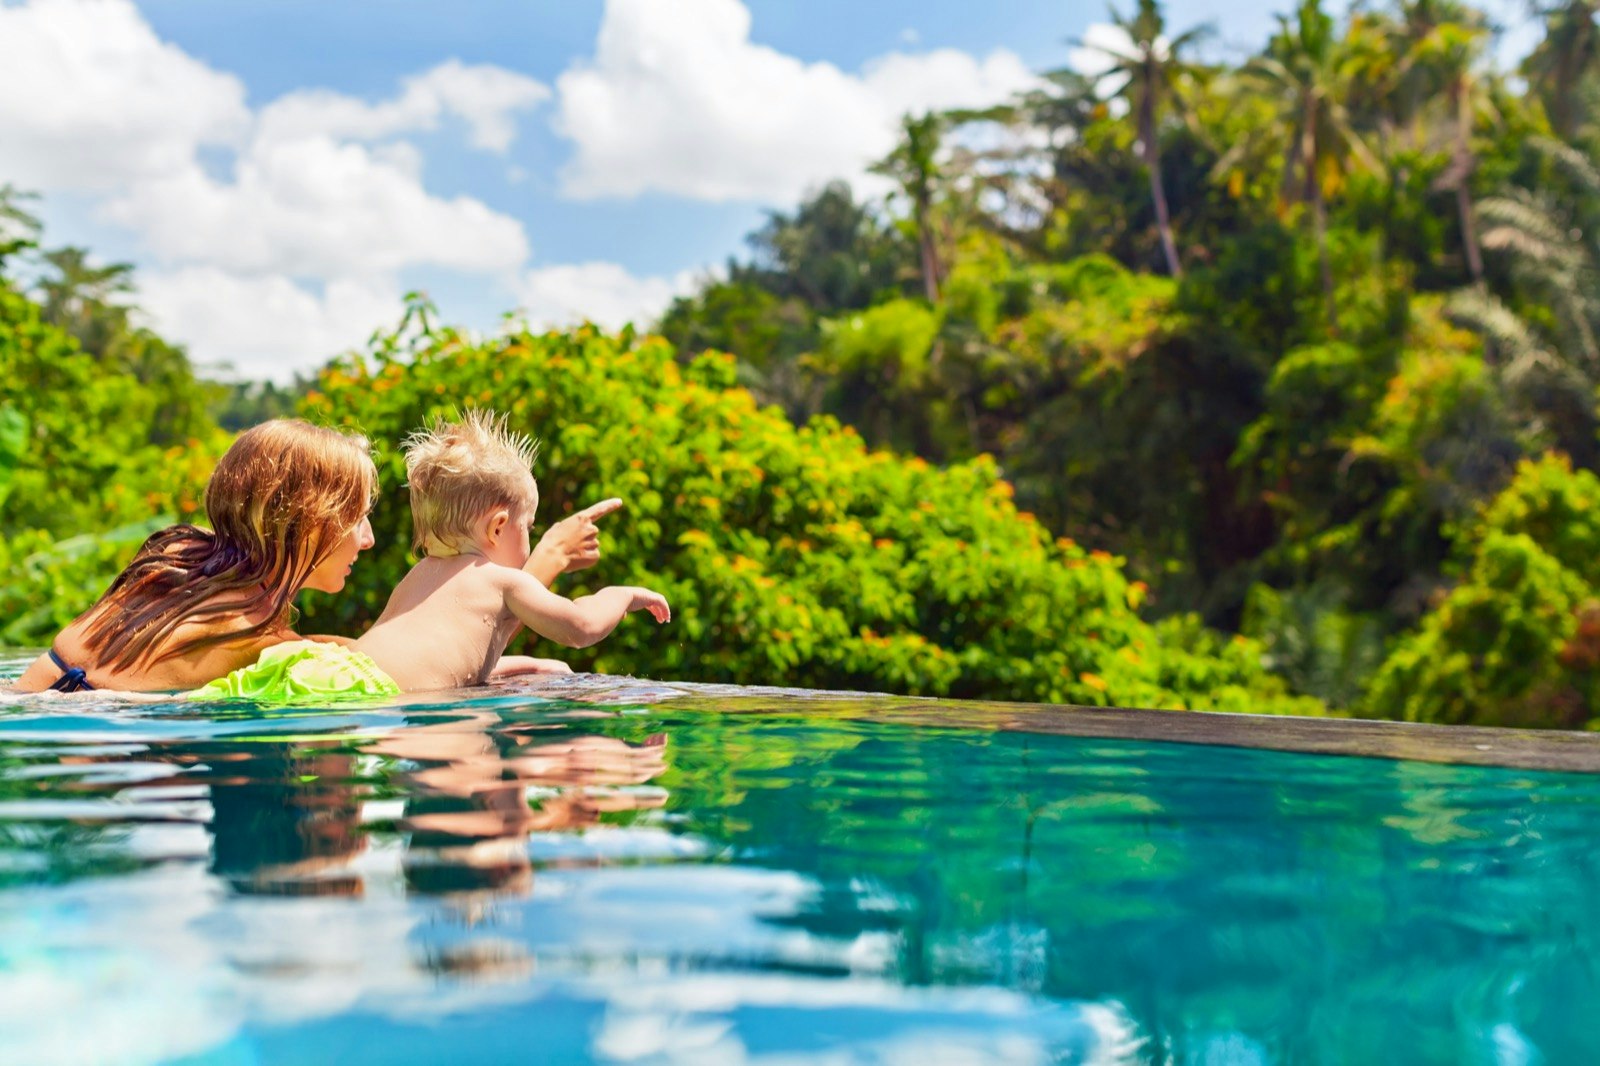 A mother and her son point to something off in the jungle on the edge of an infinity pool in Bali, Indonesia